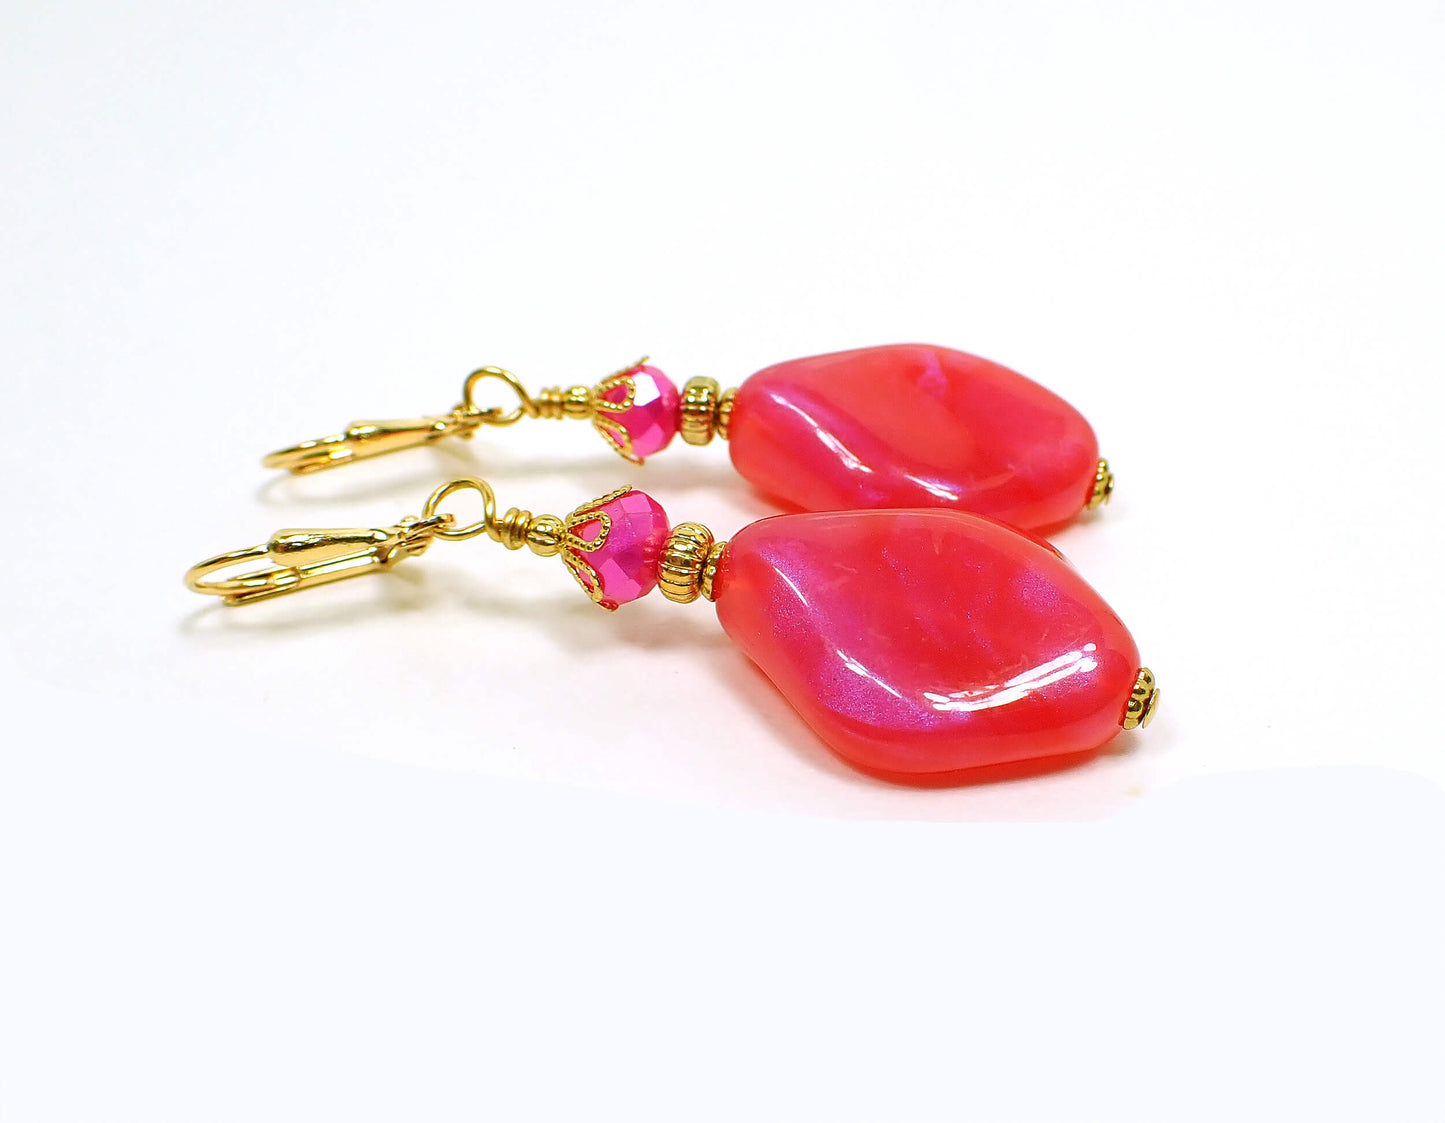 Handmade Color Shift Bright Pink Lucite Earrings Gold Plated Hook Lever Back or Clip On